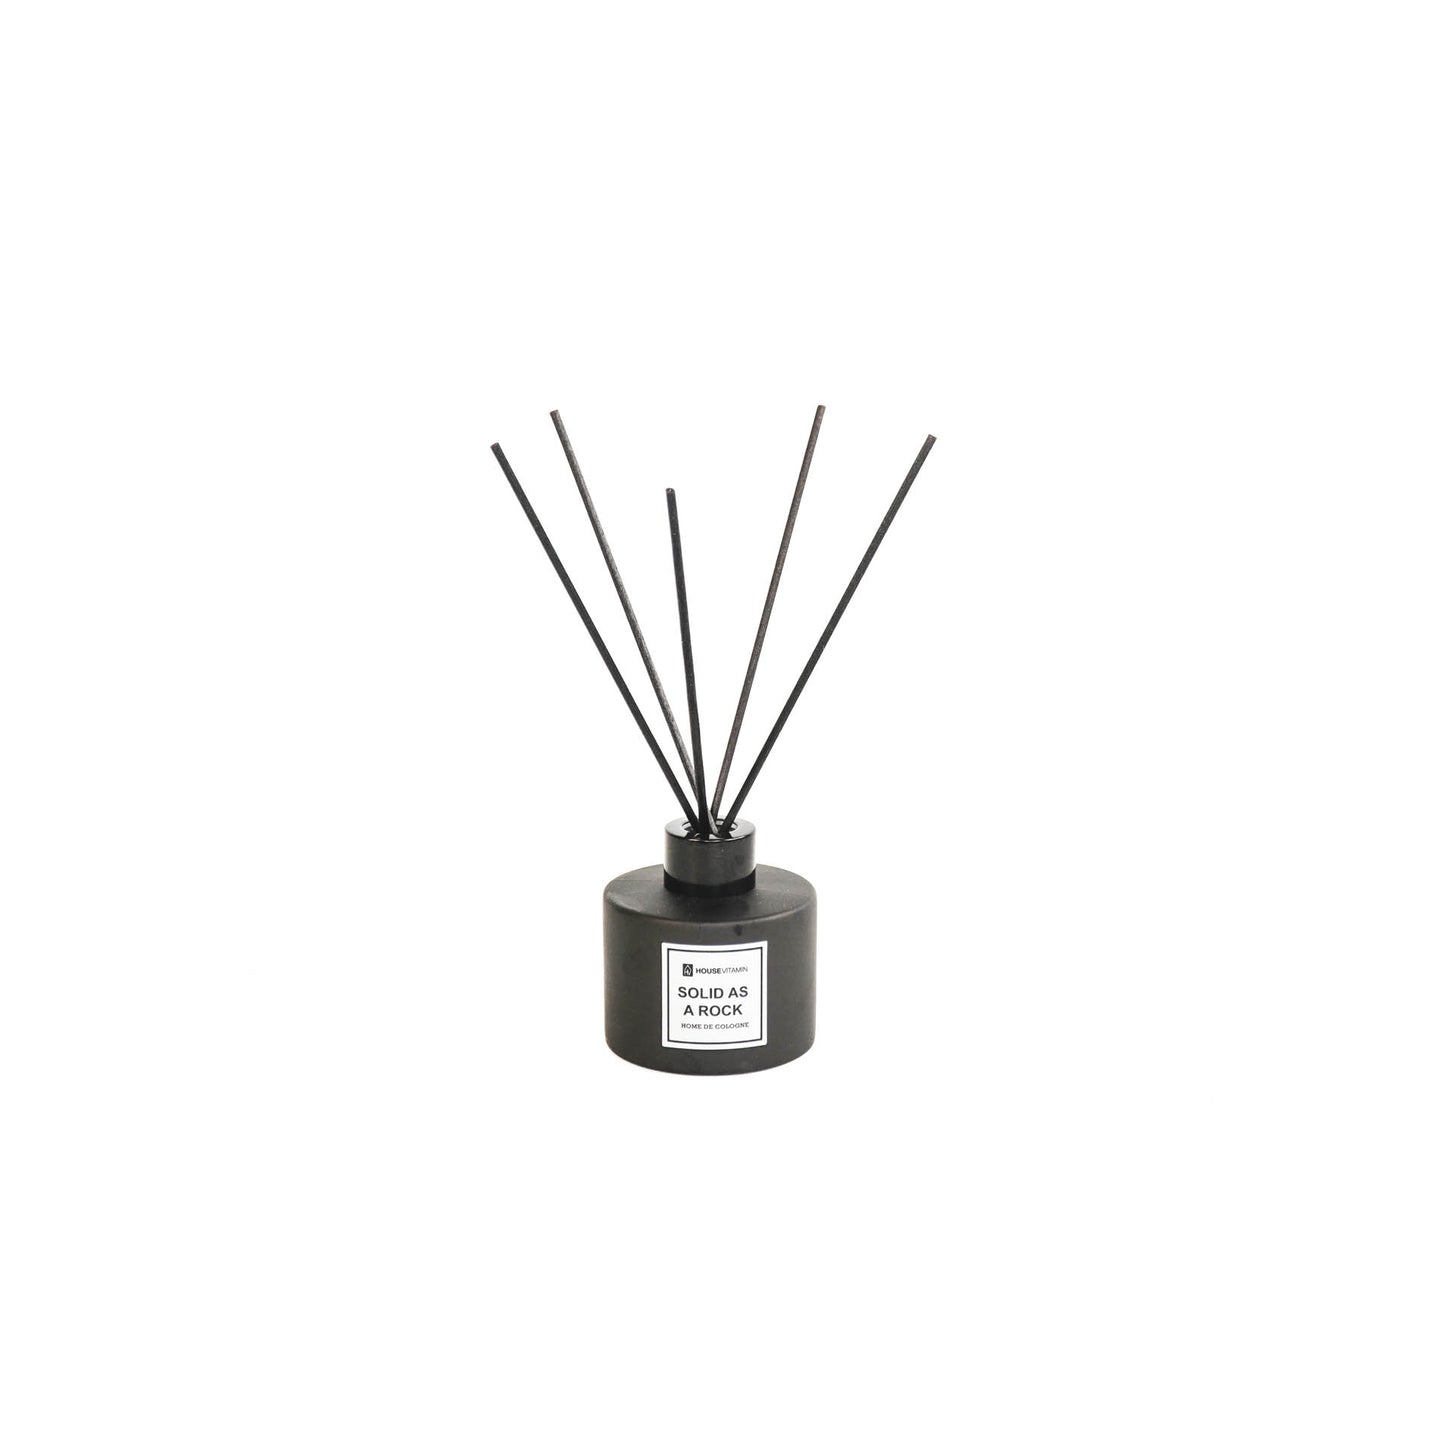 HV Home de Cologne Reed Diffusers - 100 ml - Solid as a rock